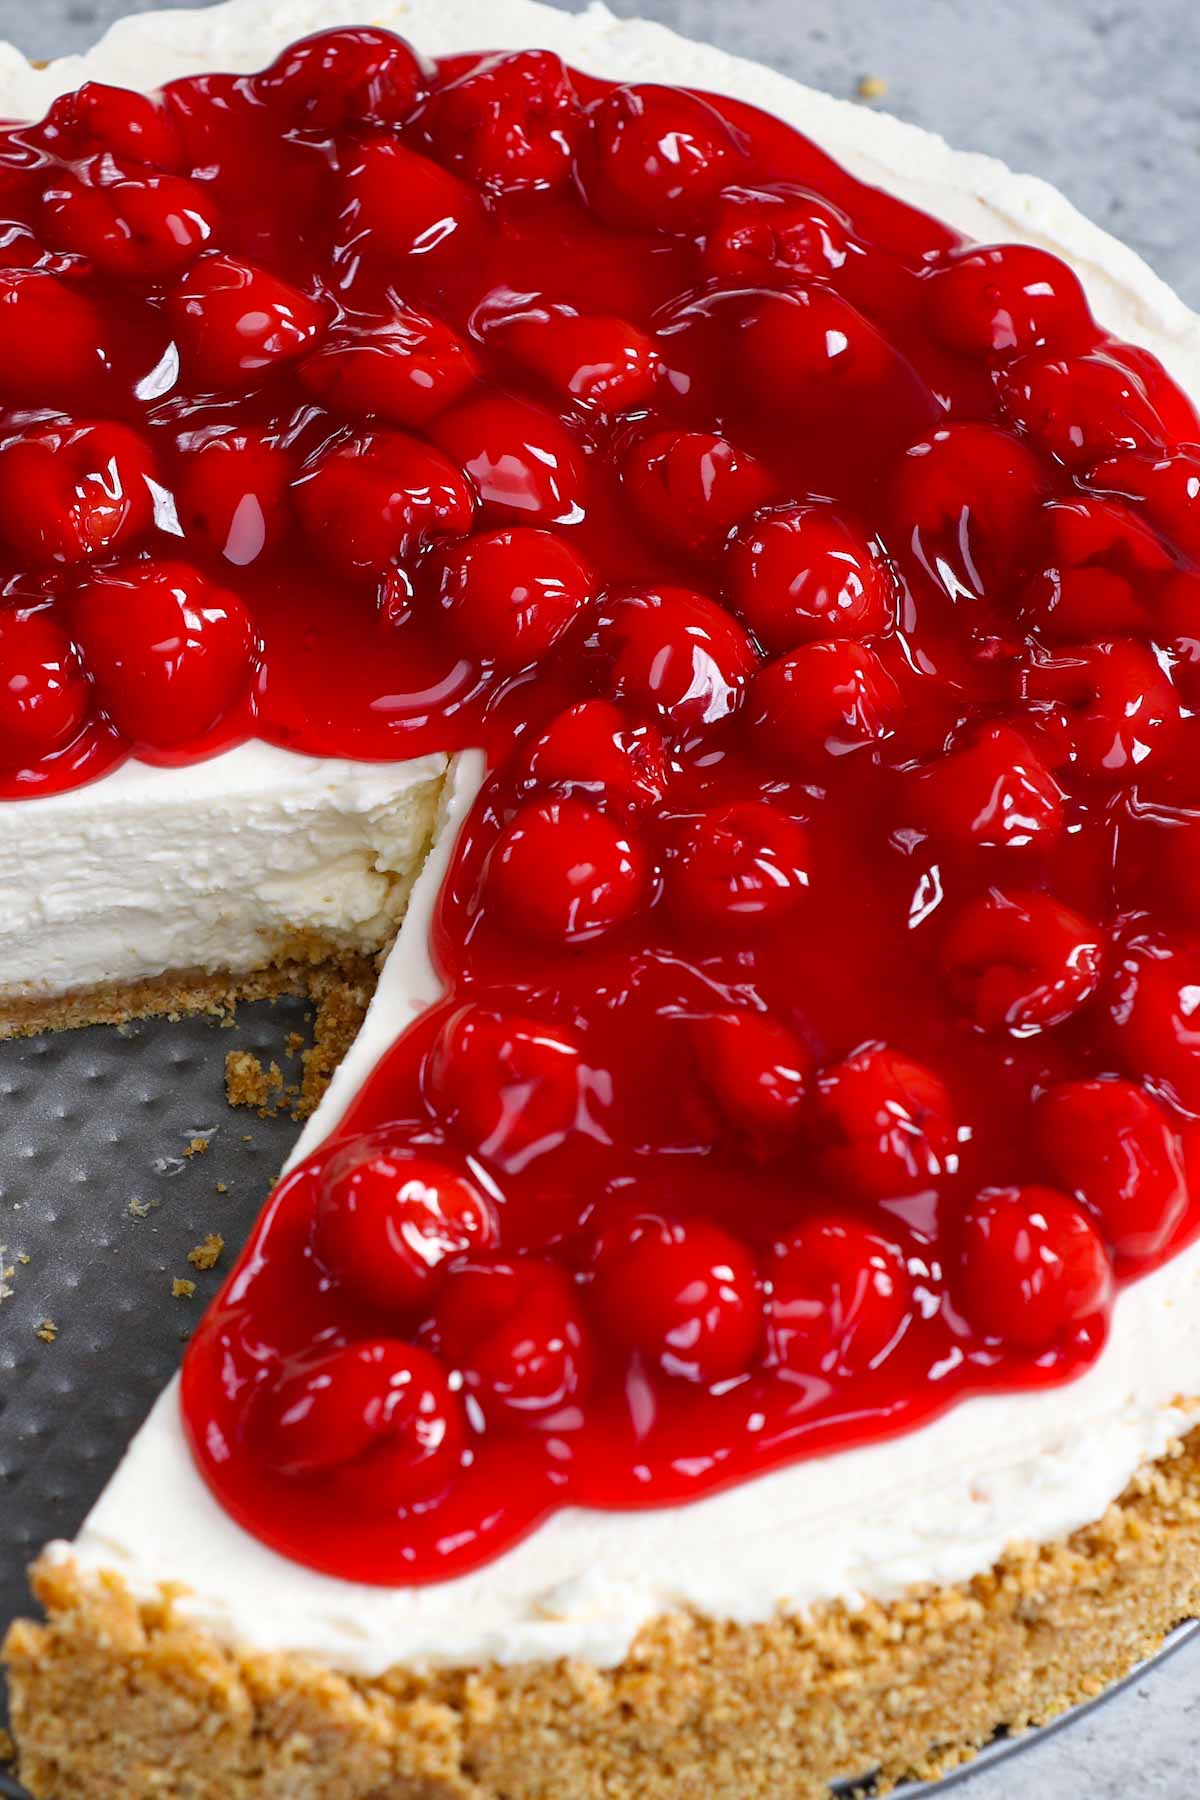 These 15 Easy Cheesecake Toppings will take your love for cheesecake to a new level! We’re talking tons of toppings – Strawberry sauce, sour cream, blueberry, cherry, and even Oreo cookies. They’ll keep your family and guests coming back for more!